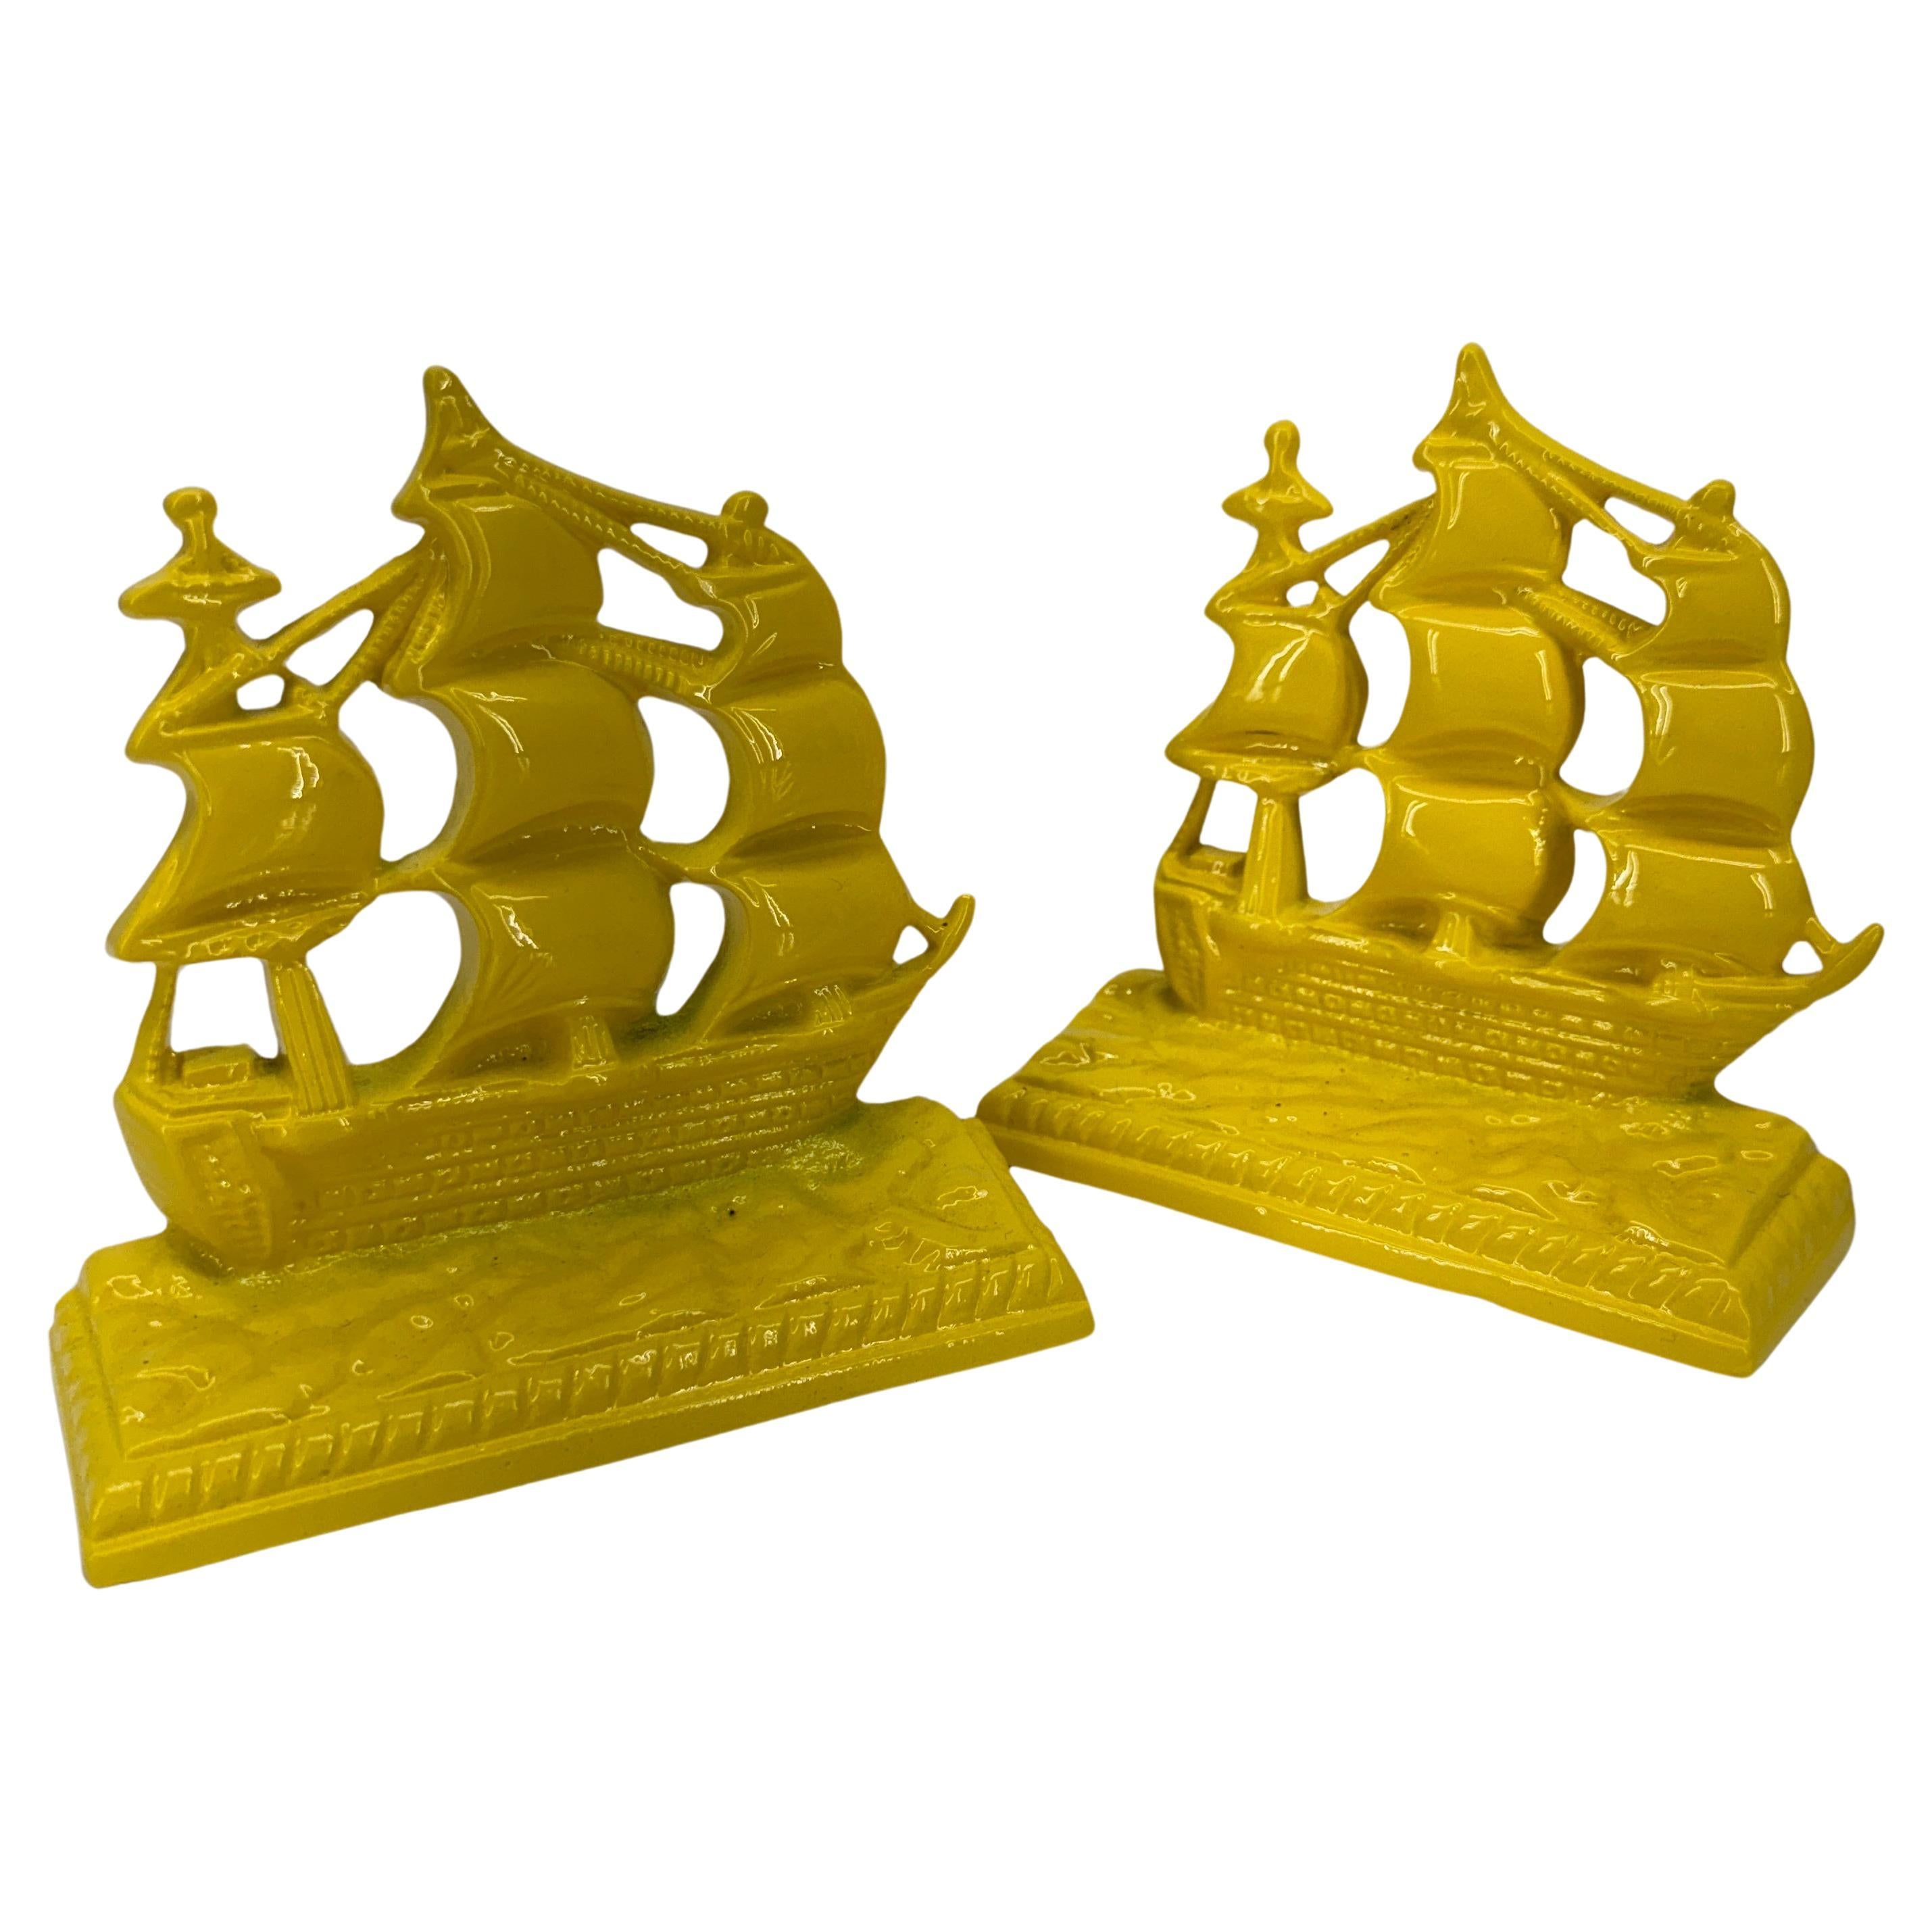 Powder-Coated Sunshine Yellow Set of Mid-Century Sailboat Bookends 

These solid vintage newly powder-coated boats are both form and function. Fabulous pair displayed on a bookshelf or desk or standing alone as sculptures on a table as a statement